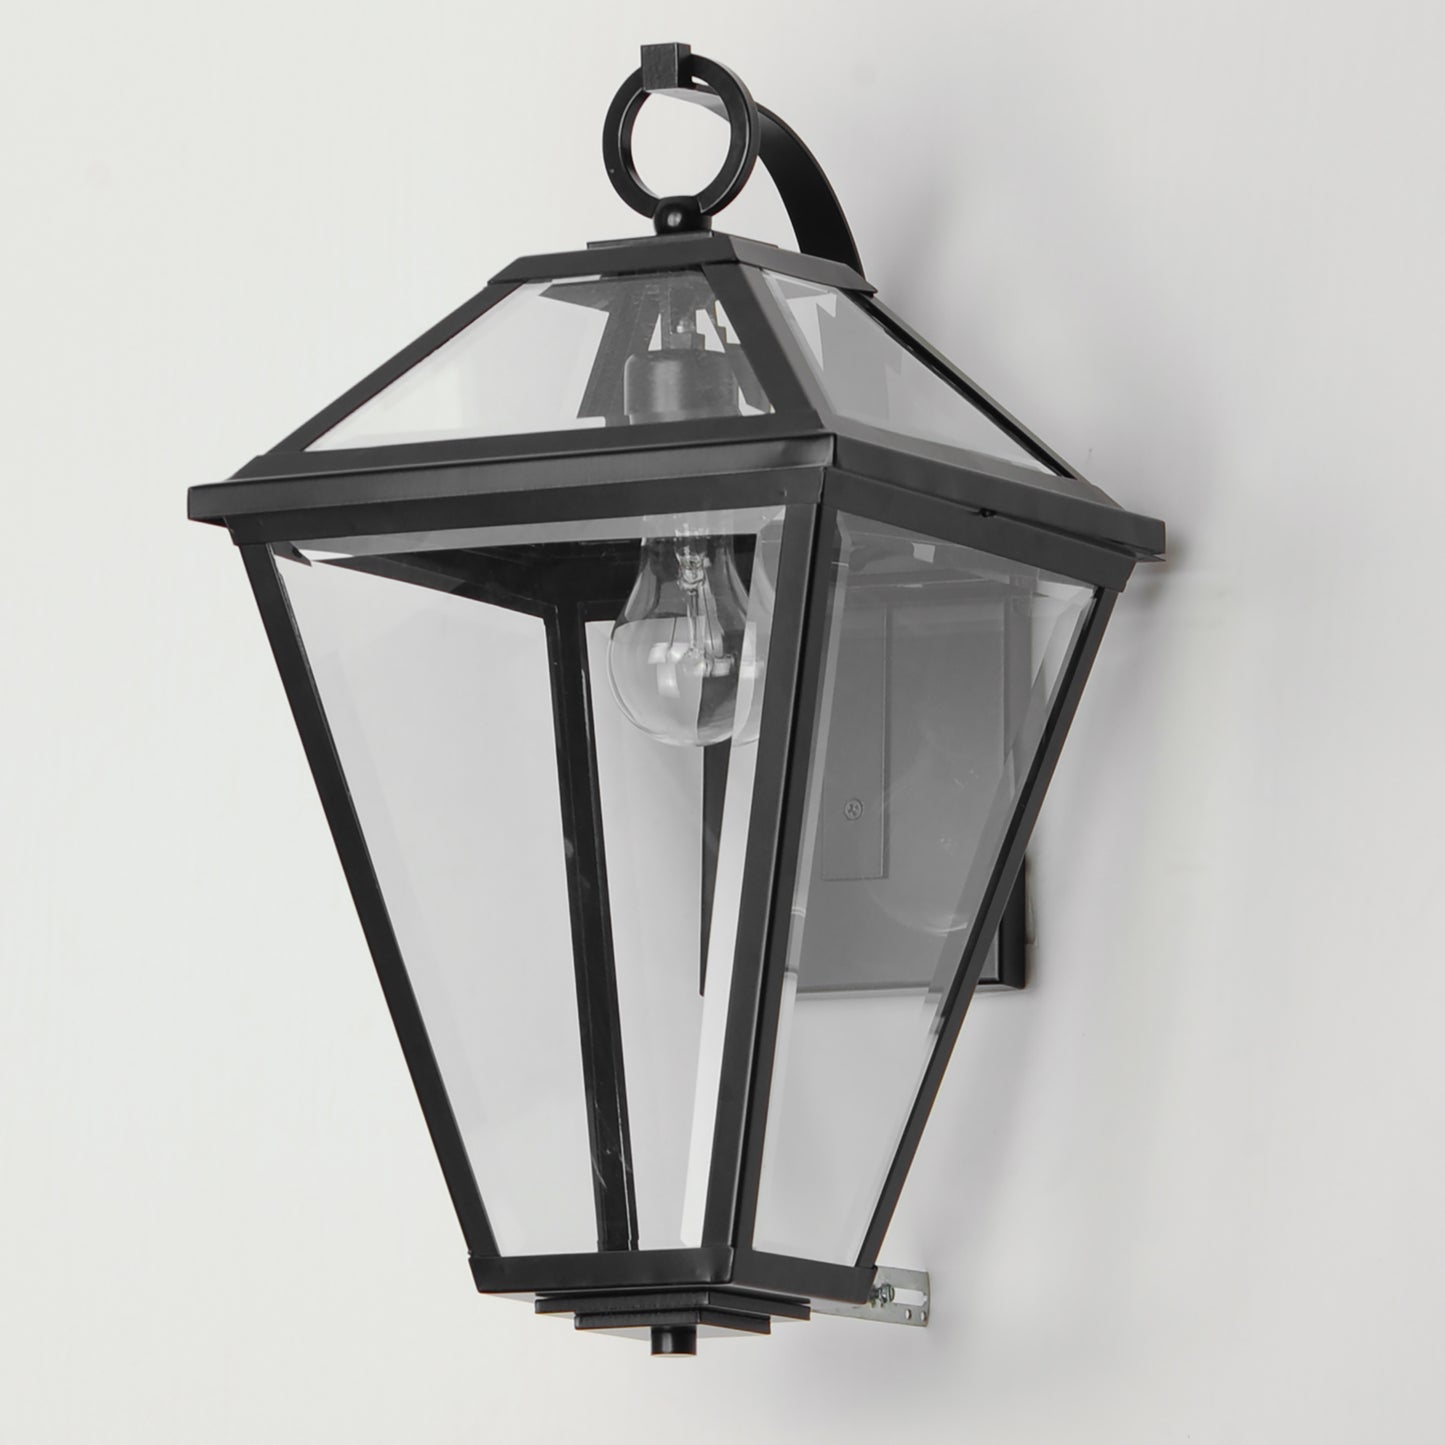 30566CLBK - Prism 18" Outdoor Wall Sconce - Black